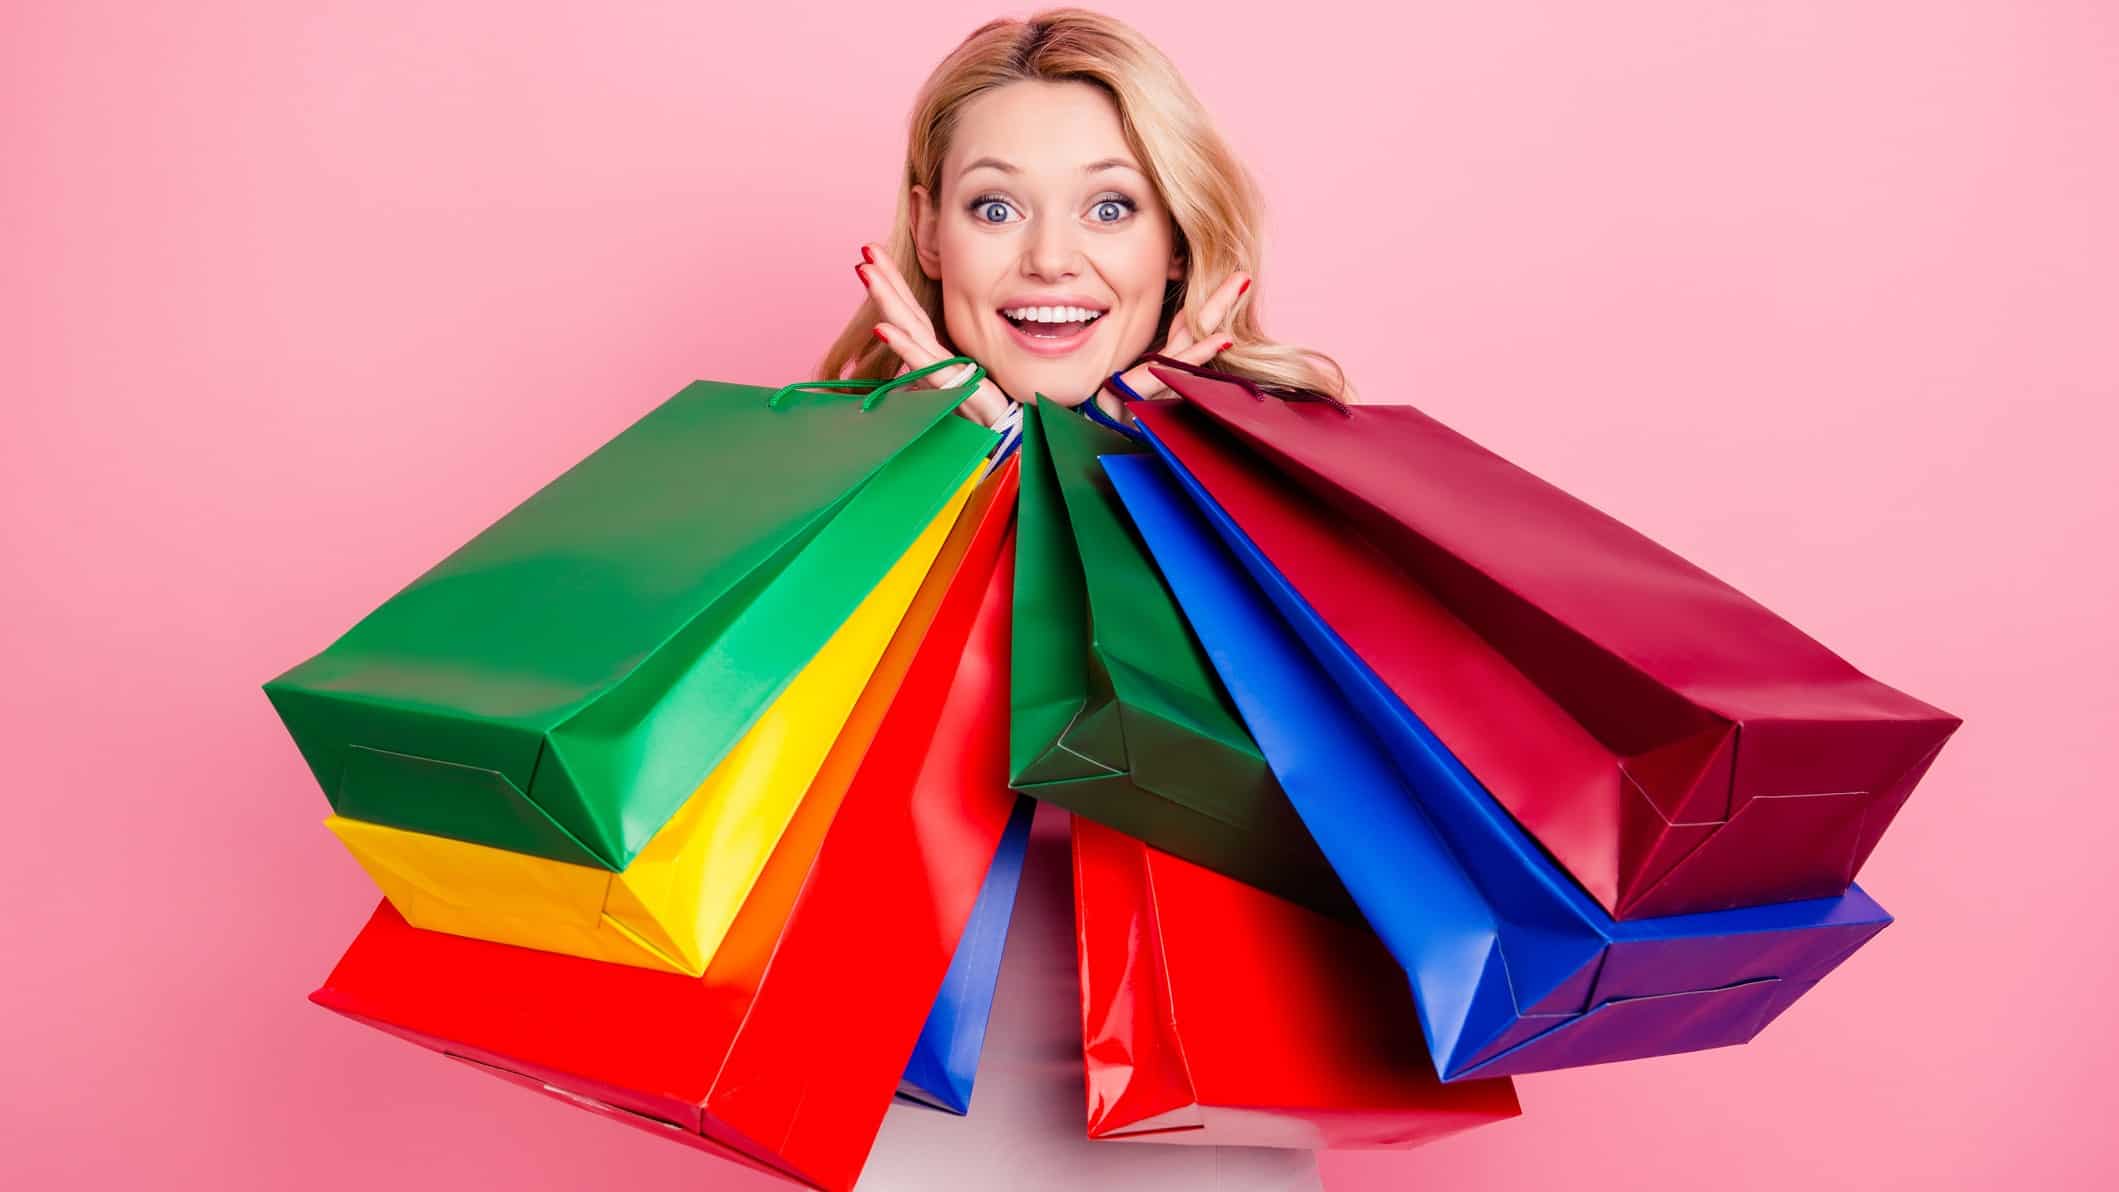 a woman smiles over the top of multiple shopping bags she is holding in both hands up near her face.